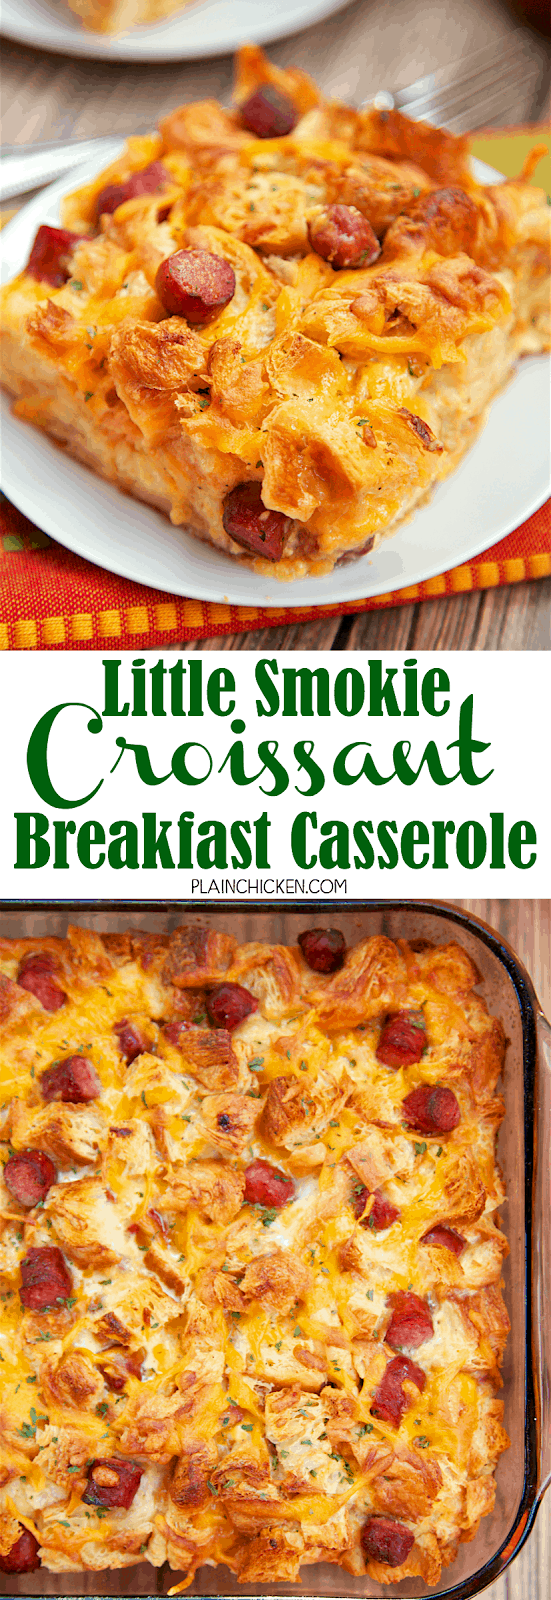 Little Smokie Croissant Breakfast Casserole - Buttery croissants, cheddar cheese, little smokies, eggs and milk. This casserole is assembled the night before and refrigerated overnight. Perfect for an easy weekday breakfast or overnight guests. We like to have this for dinner too! SO good! Everyone love this casserole!